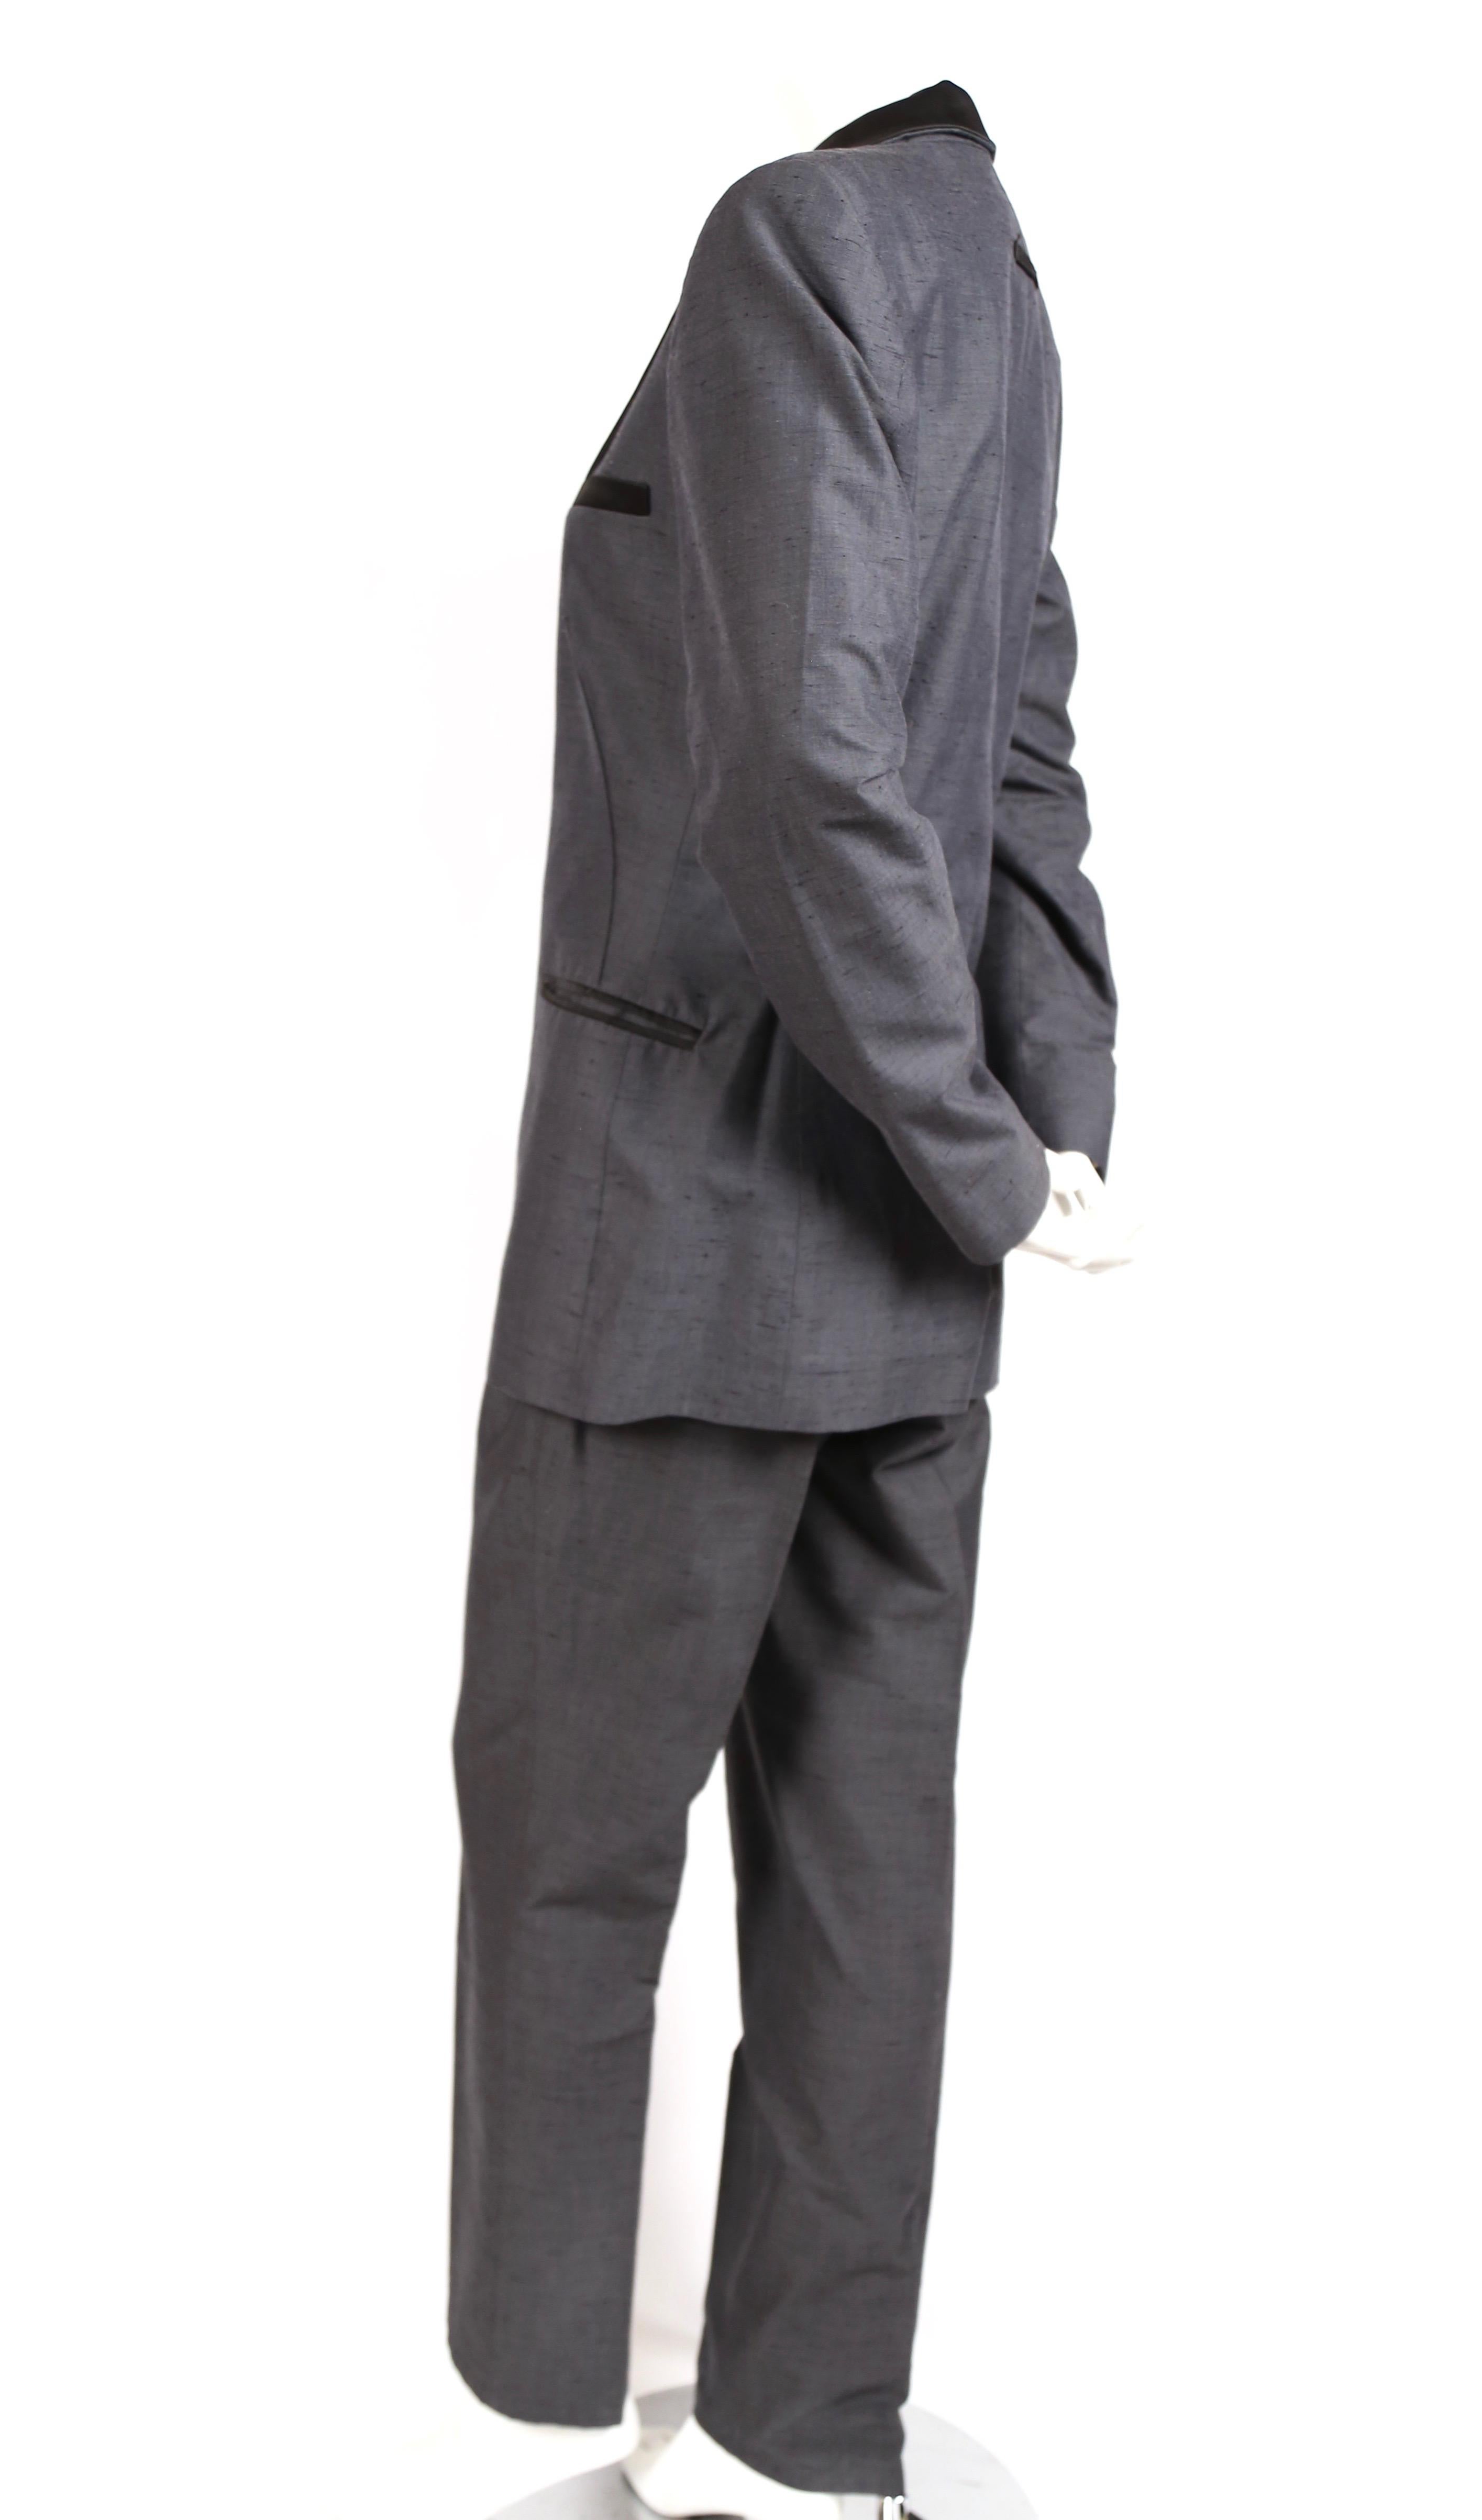 Dark grey suit with black trim and silver safety pin and chain detail designed by Jean Paul Gaultier dating to the 1990's. French size 40/ Italian size 44. Approximate measurements for jacket: shoulders 16